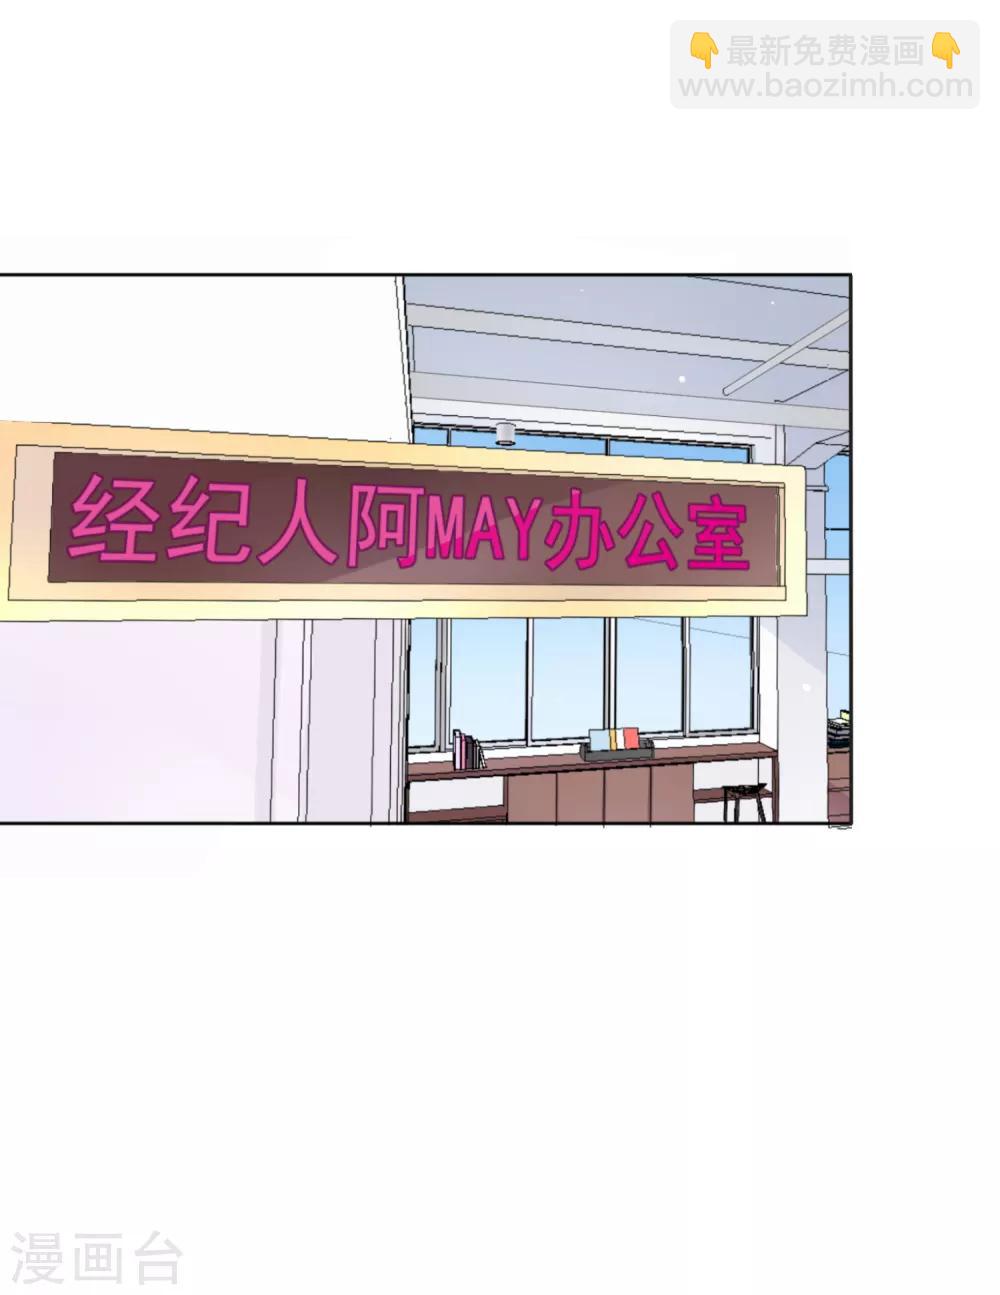 One Kiss A Day - 第16话 合作愉快(1/2) - 2